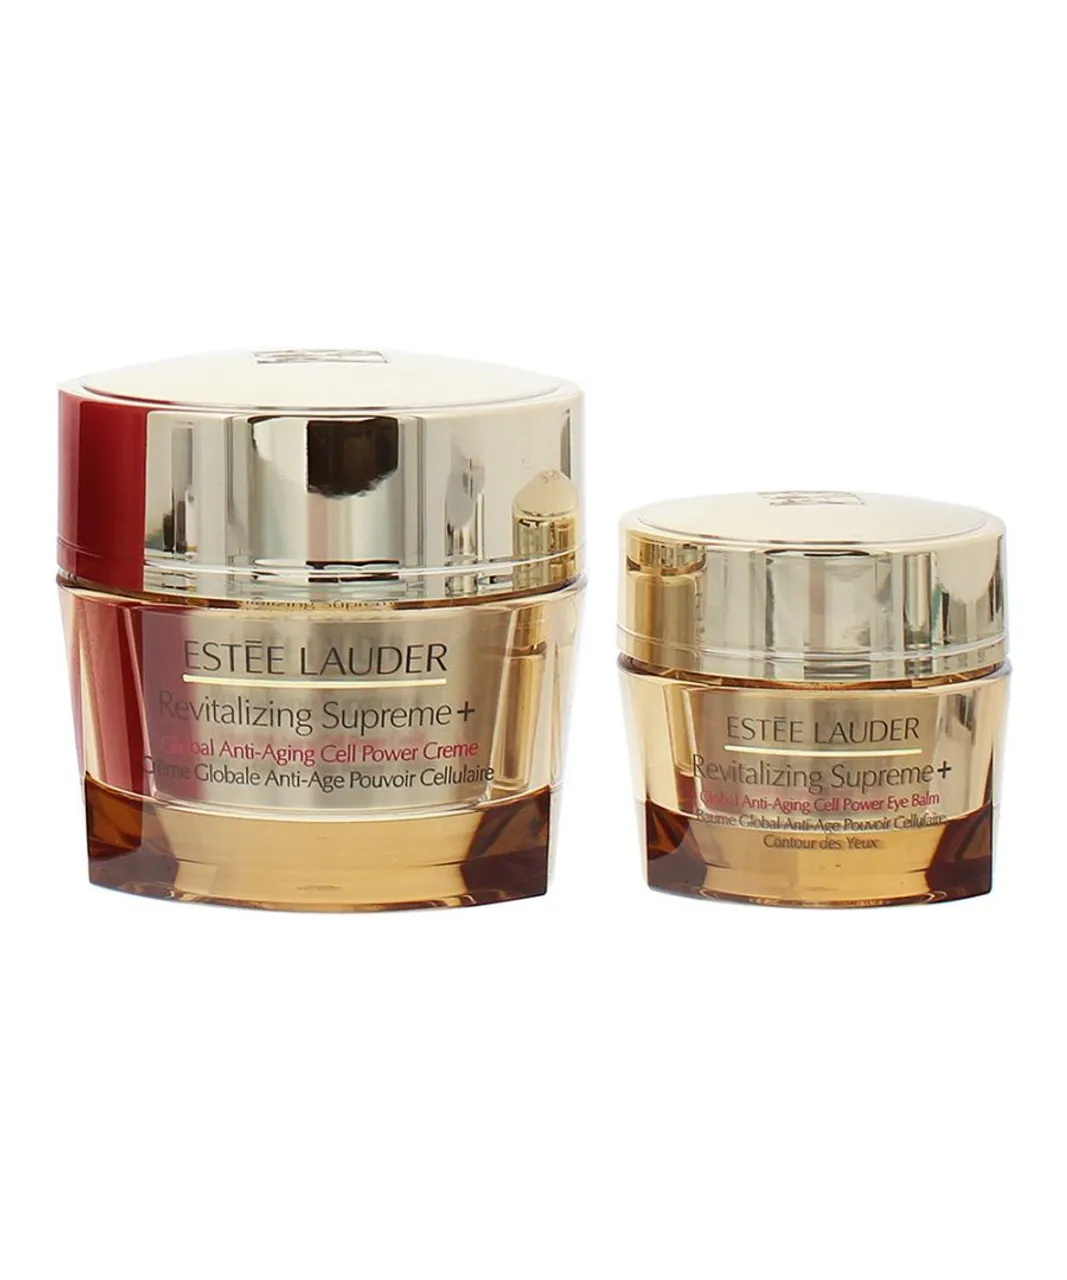 Estee Lauder Womens Glowing All The Way Revitalizing Supreme Anti-Aging Gift Set - Cream - One Size